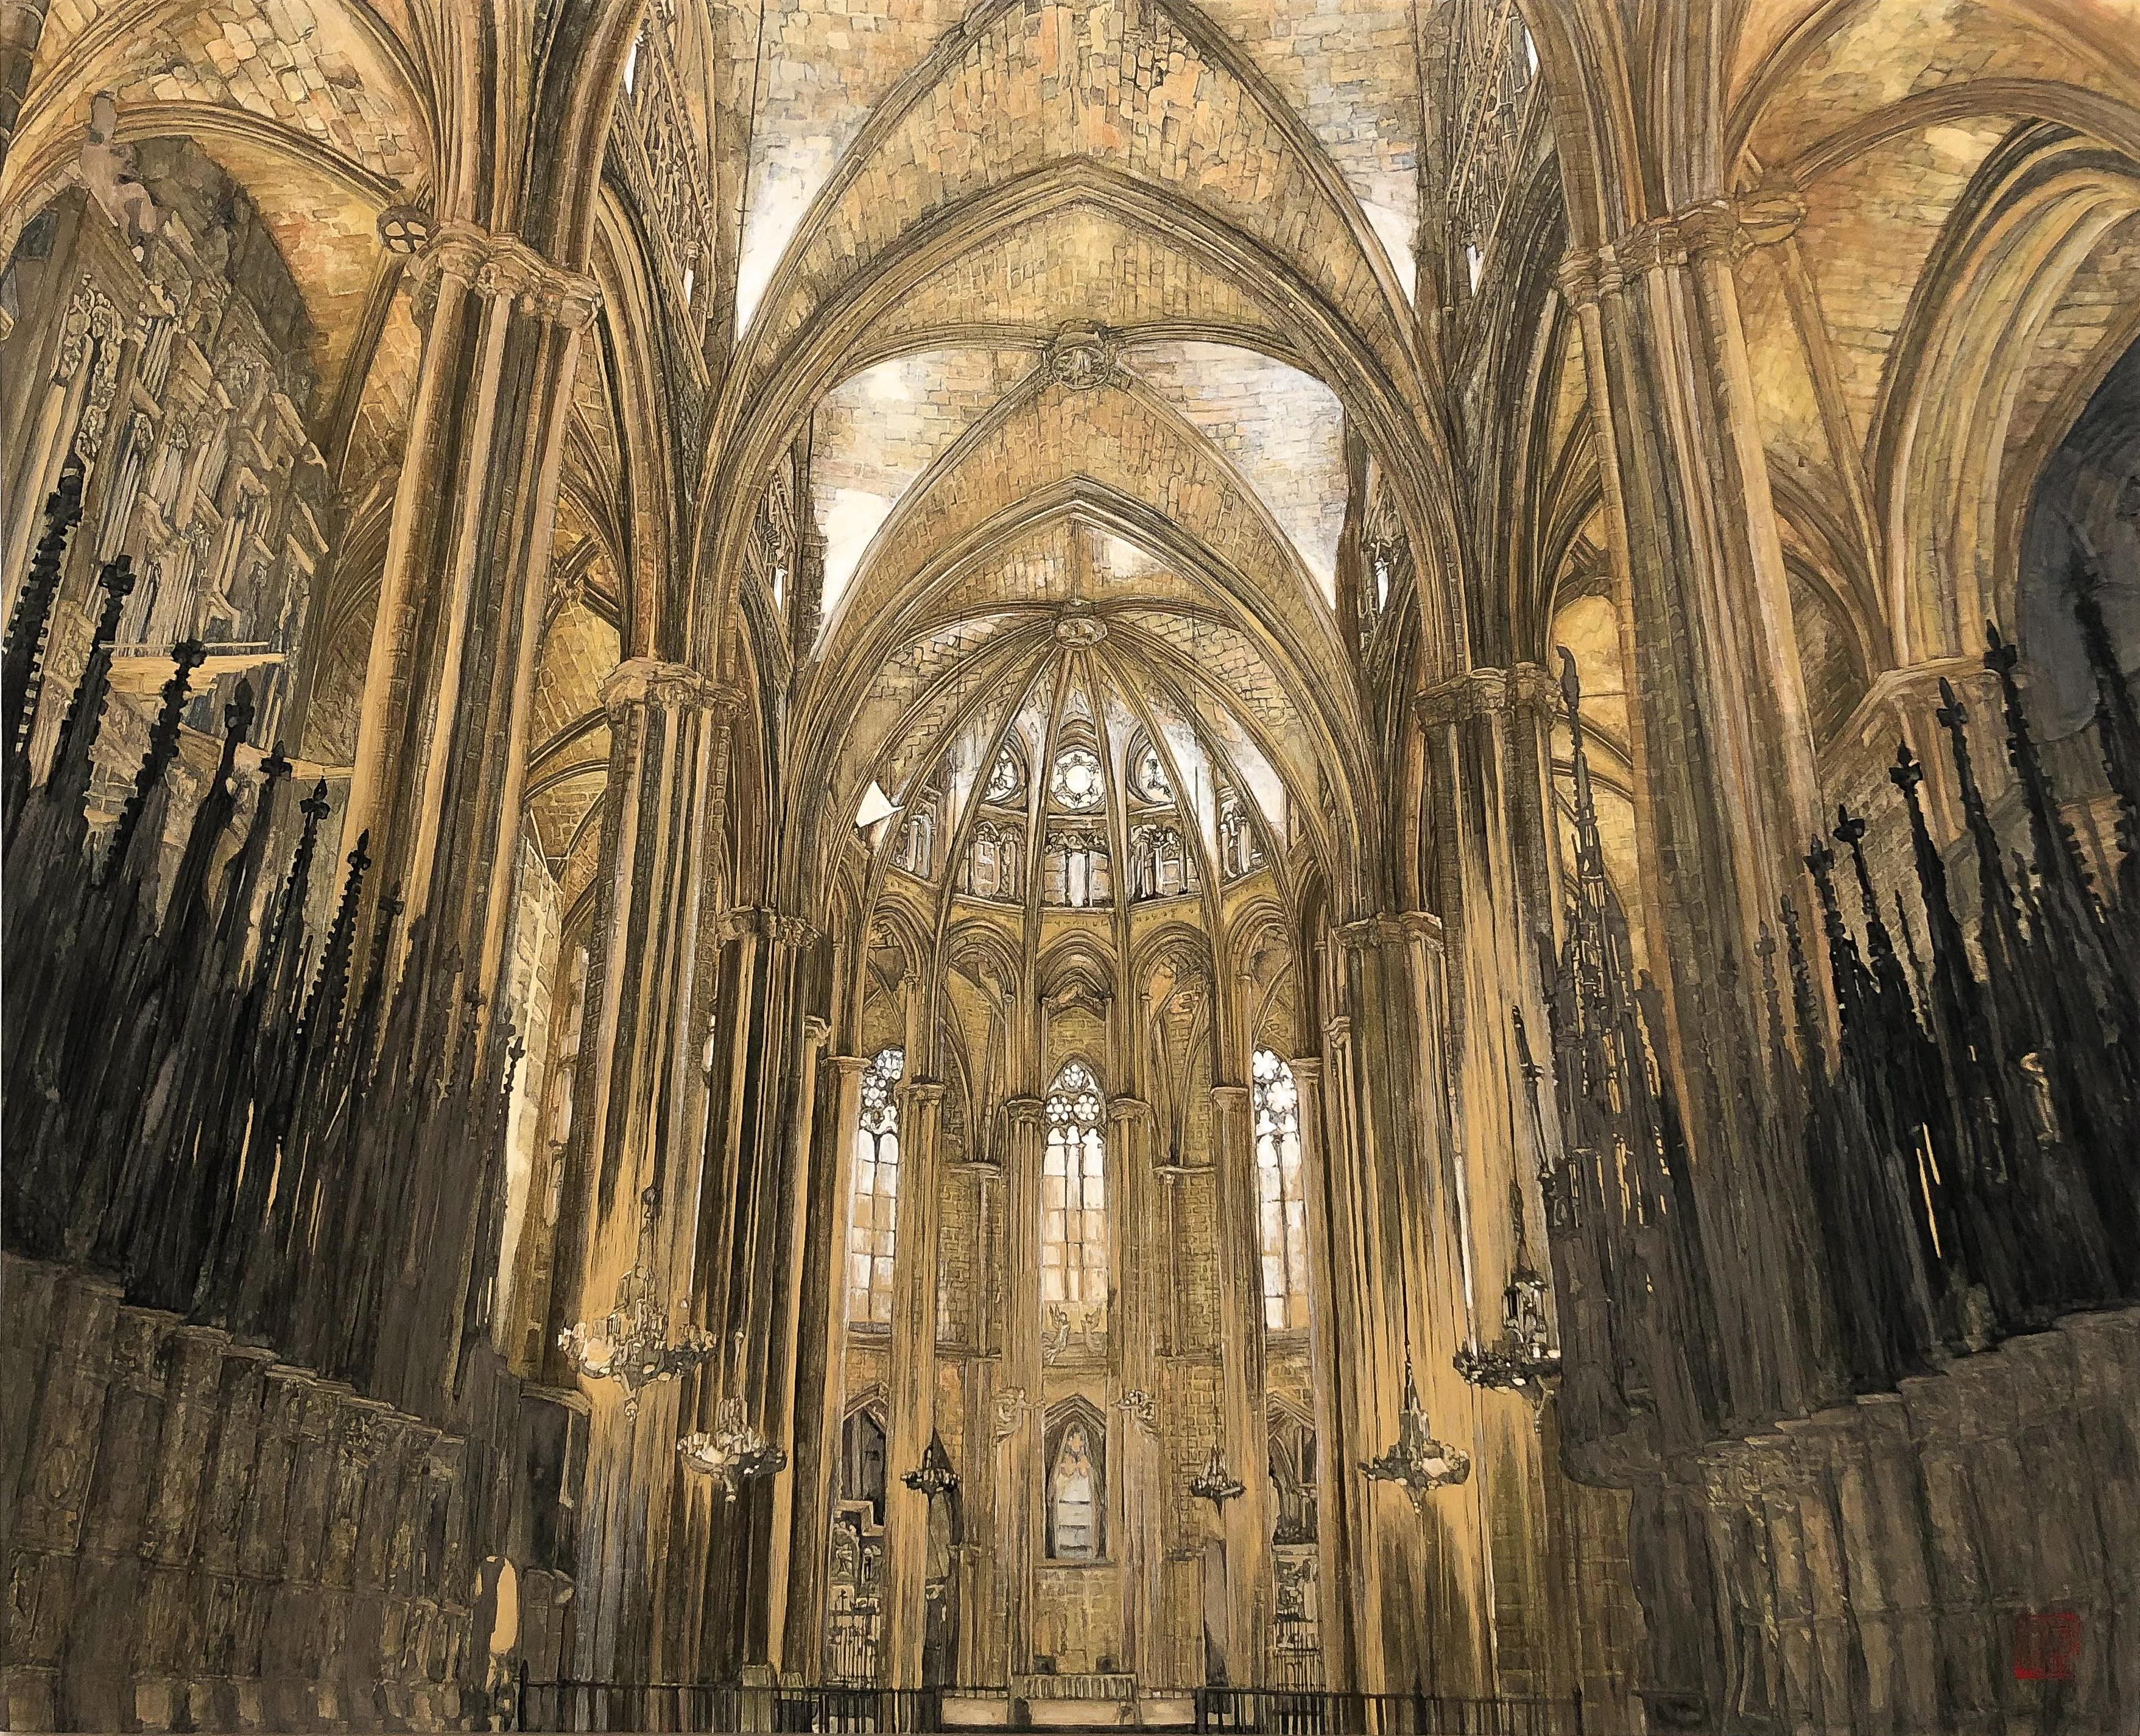 Barcelona Cathedral - 24k Gold and Minerals, Architecture, Gothic, Realism